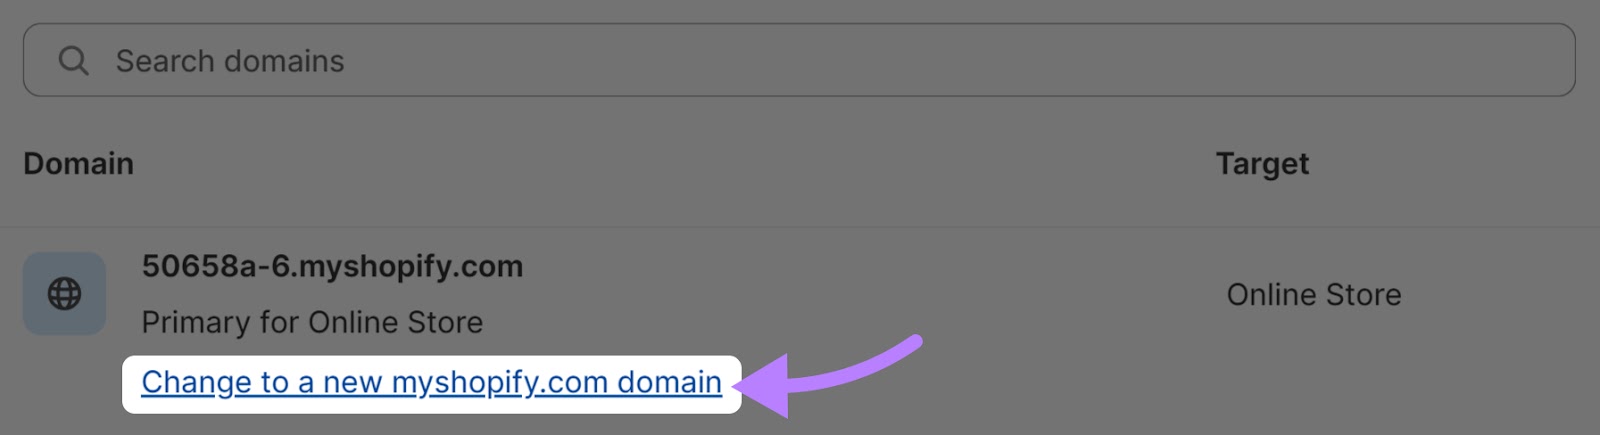 “Change to a new myshopify.com domain” link highlighted in Shopify admin